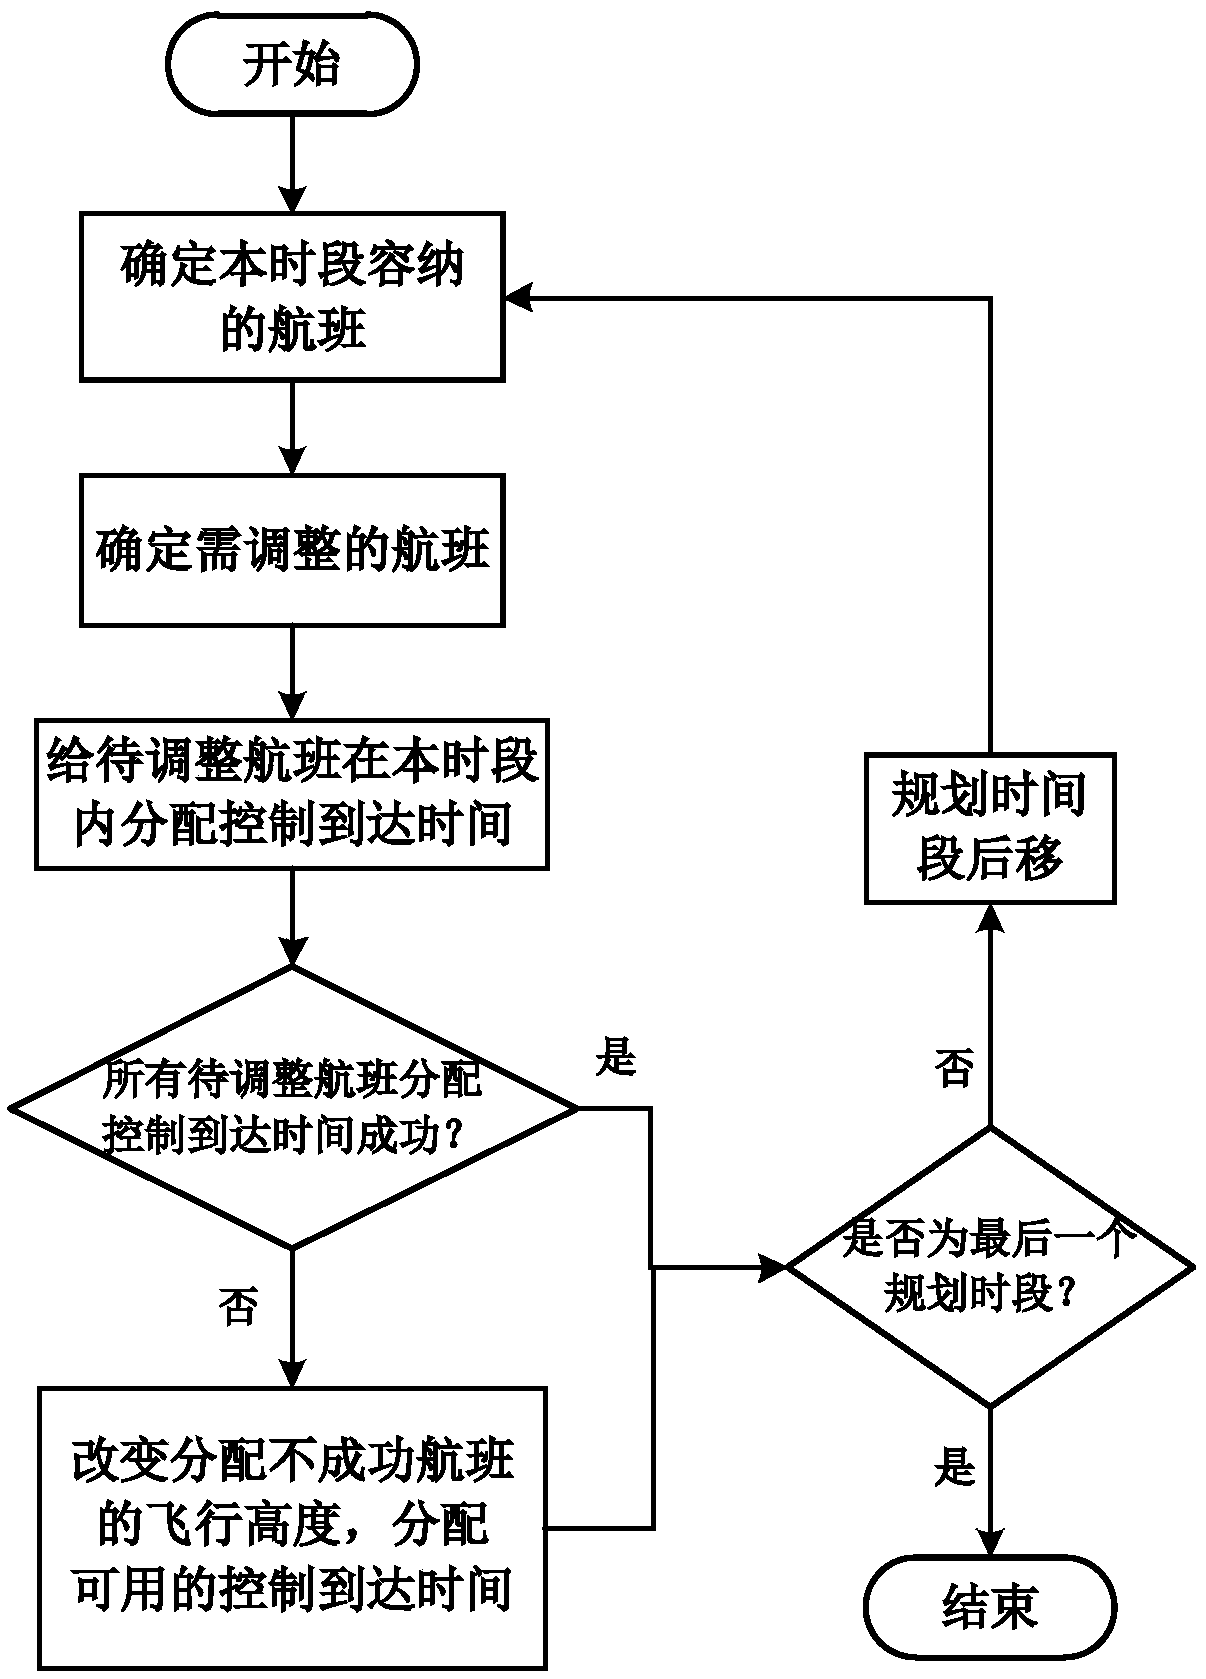 Multi-airspace trajectory planning and negotiation method oriented to four-dimensional track operation